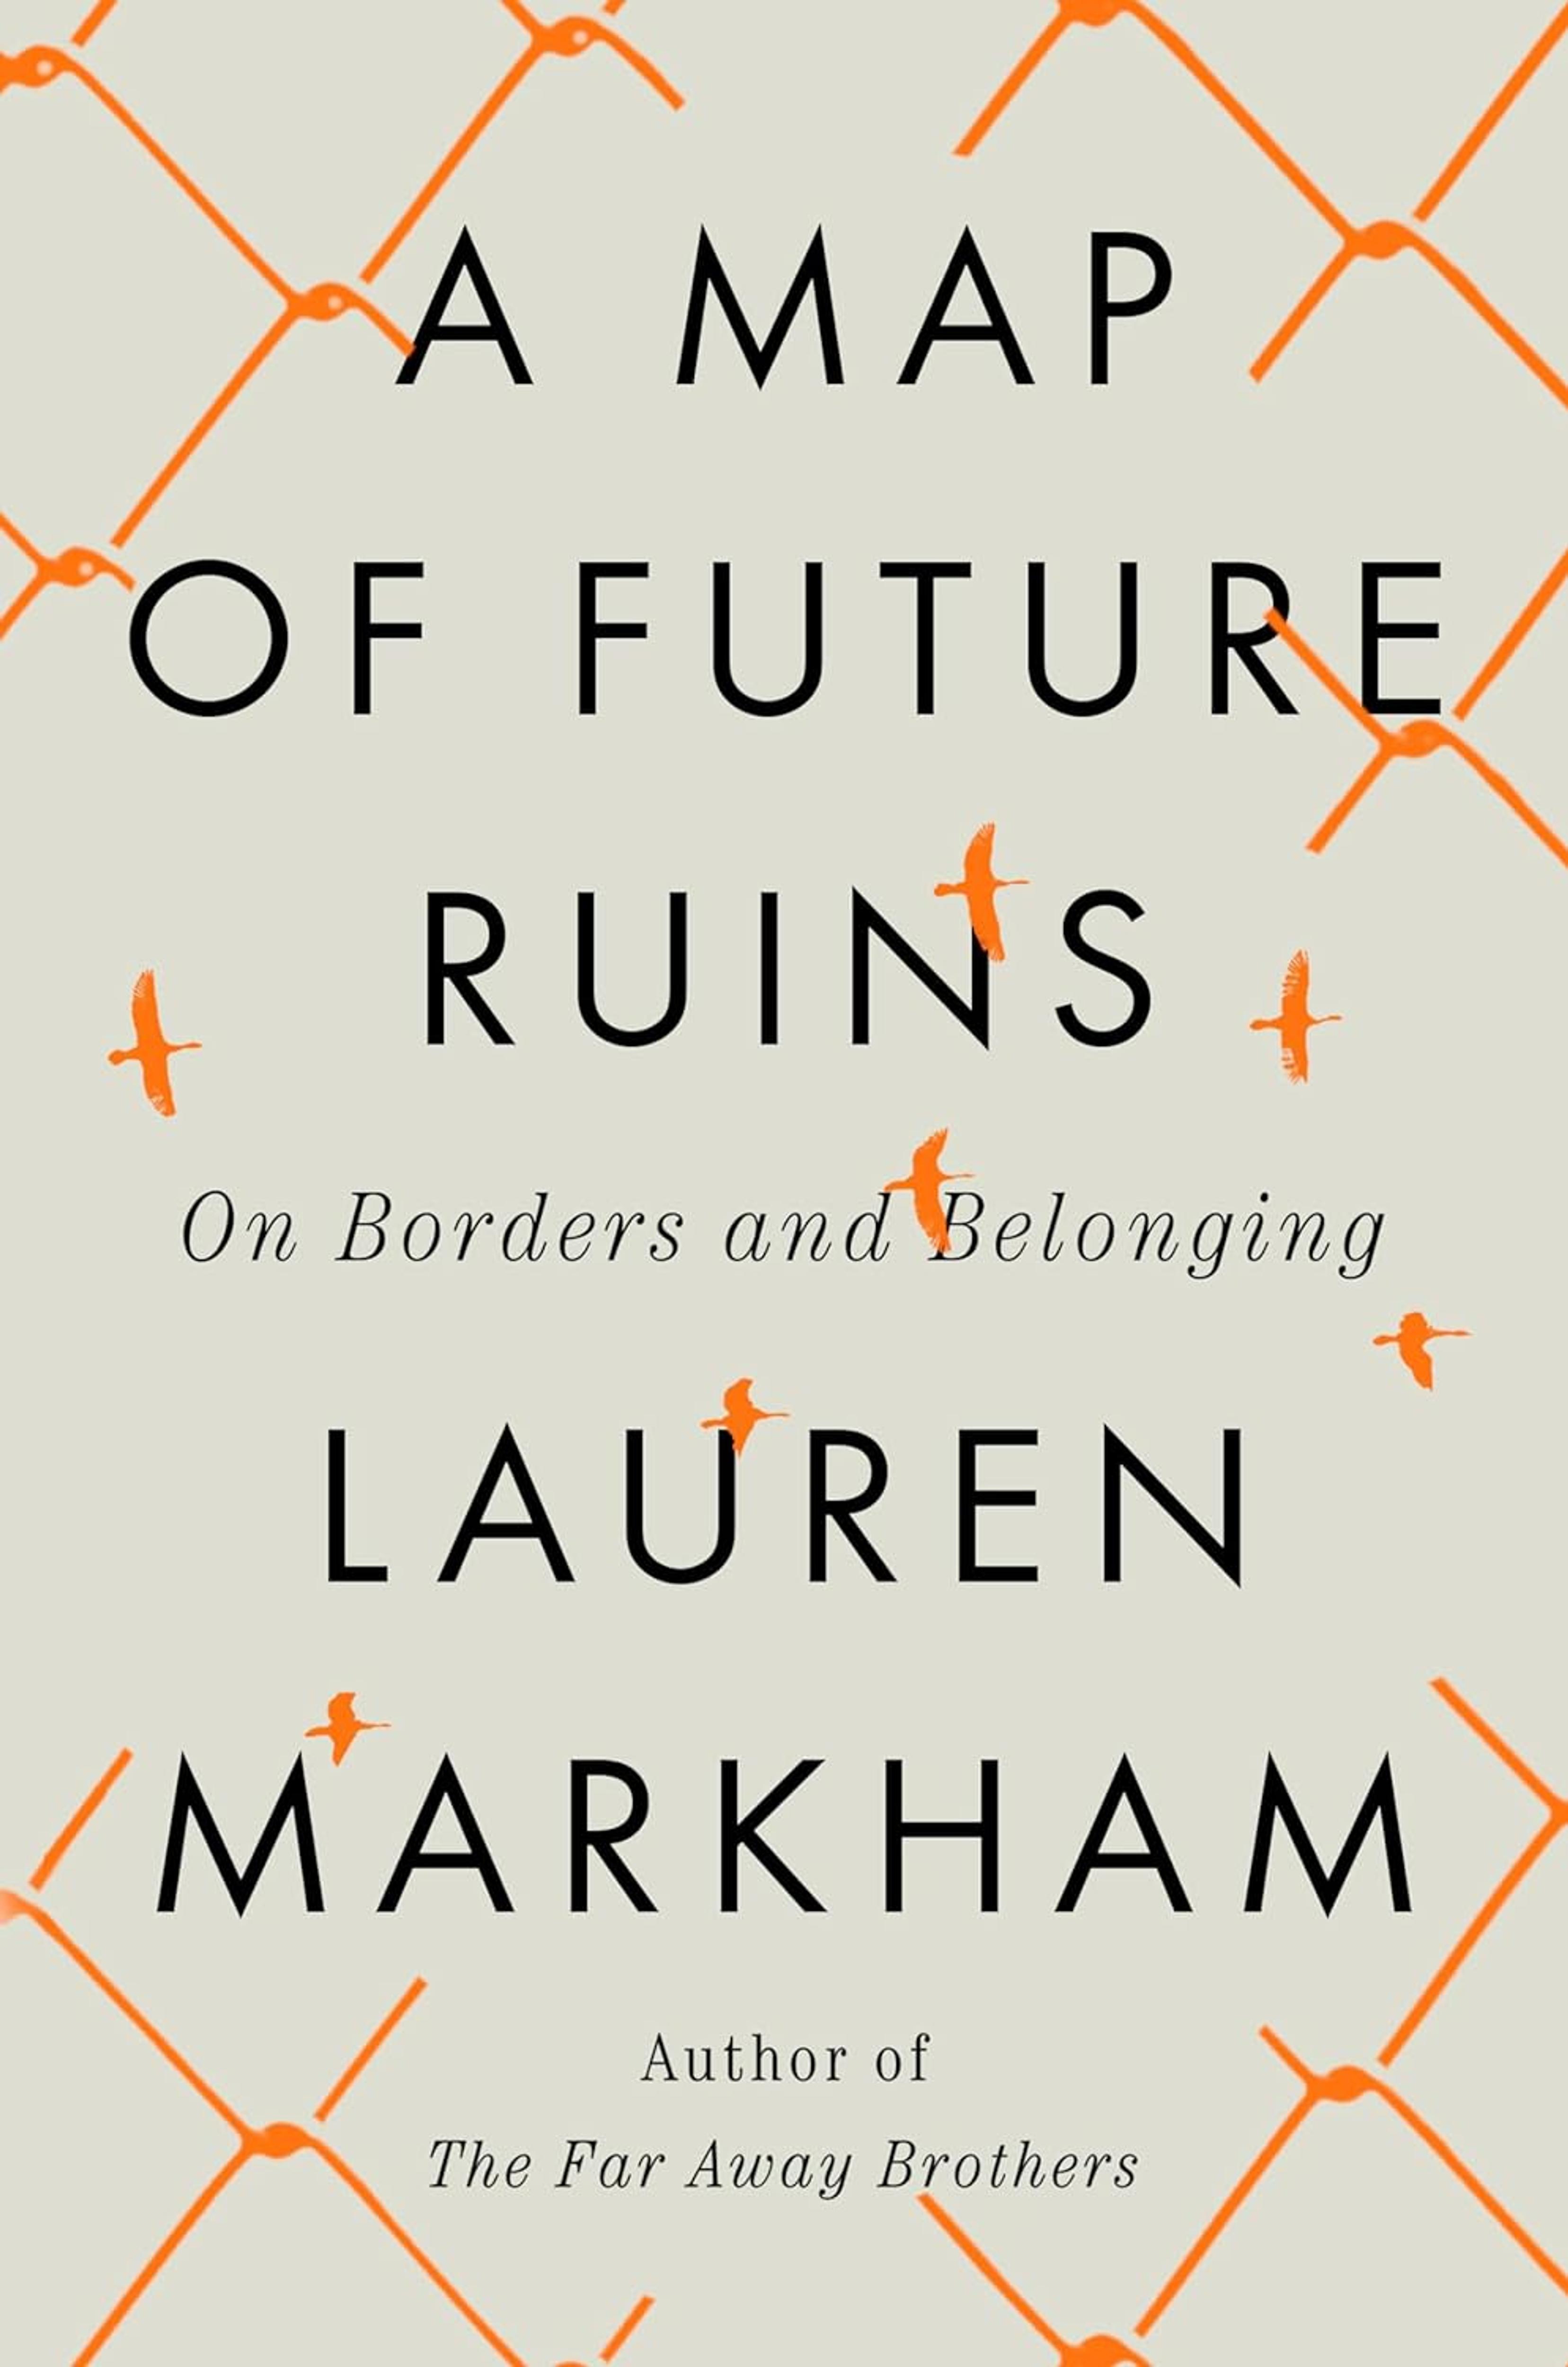 The Place You Now Live: On Lauren Markham’s “A Map of Future Ruins”